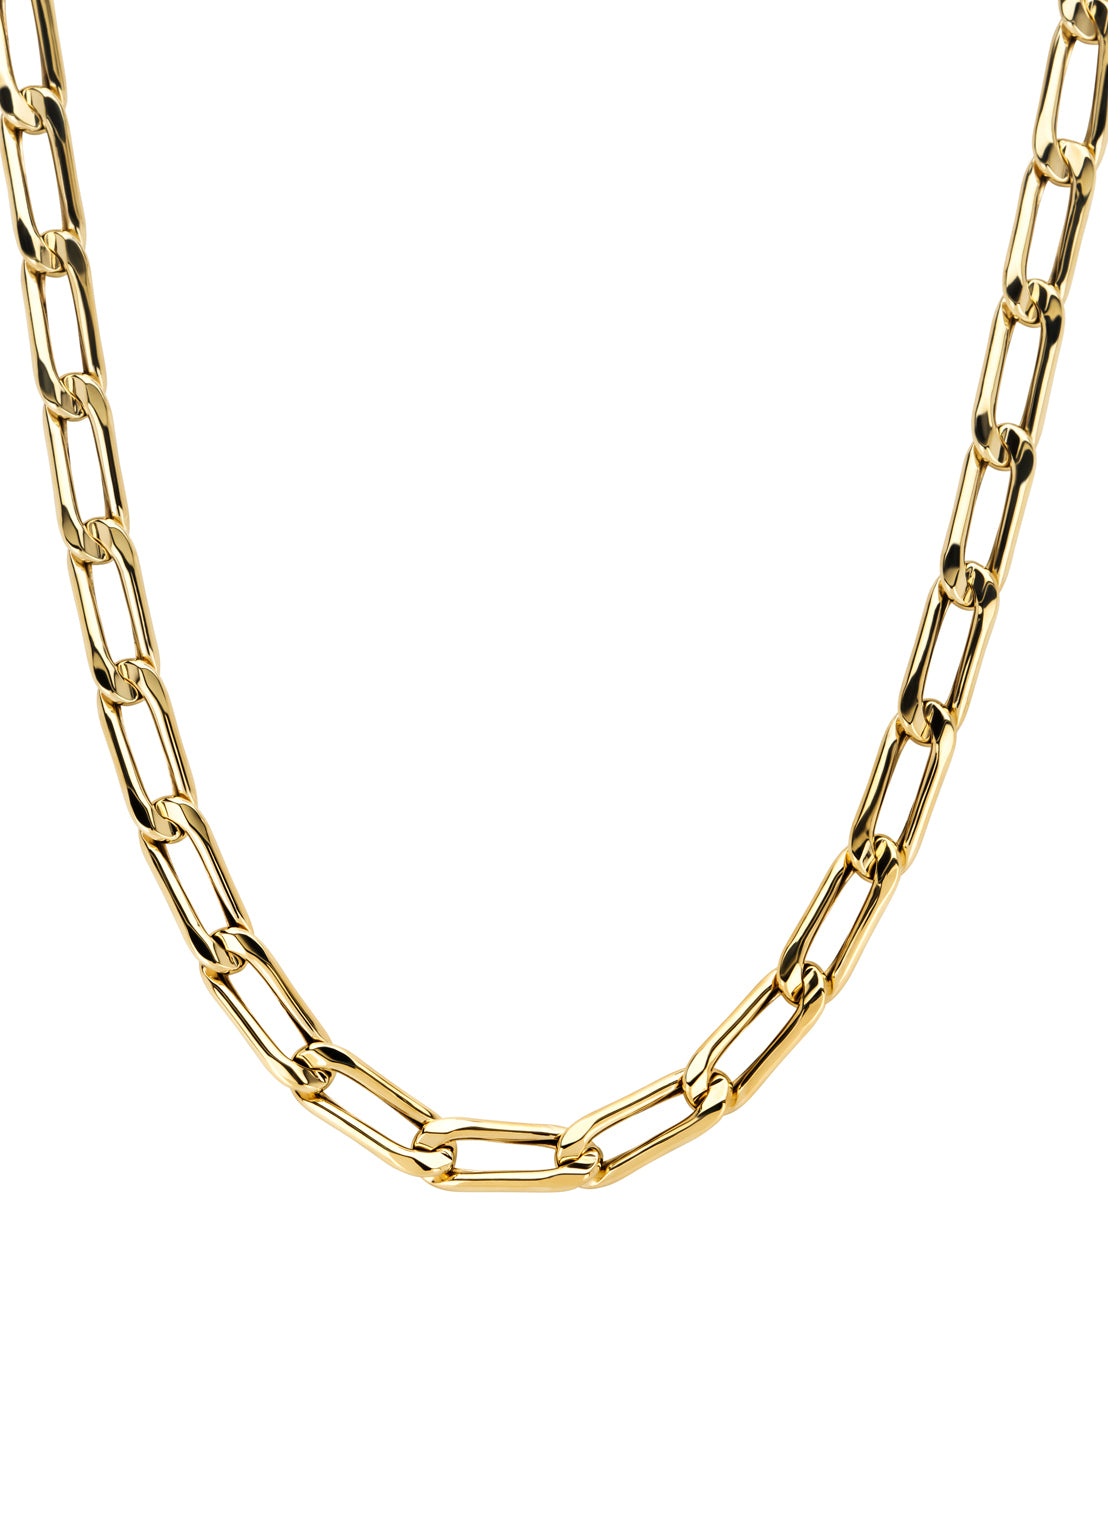 Yellow gold Collier Timeless Treasures